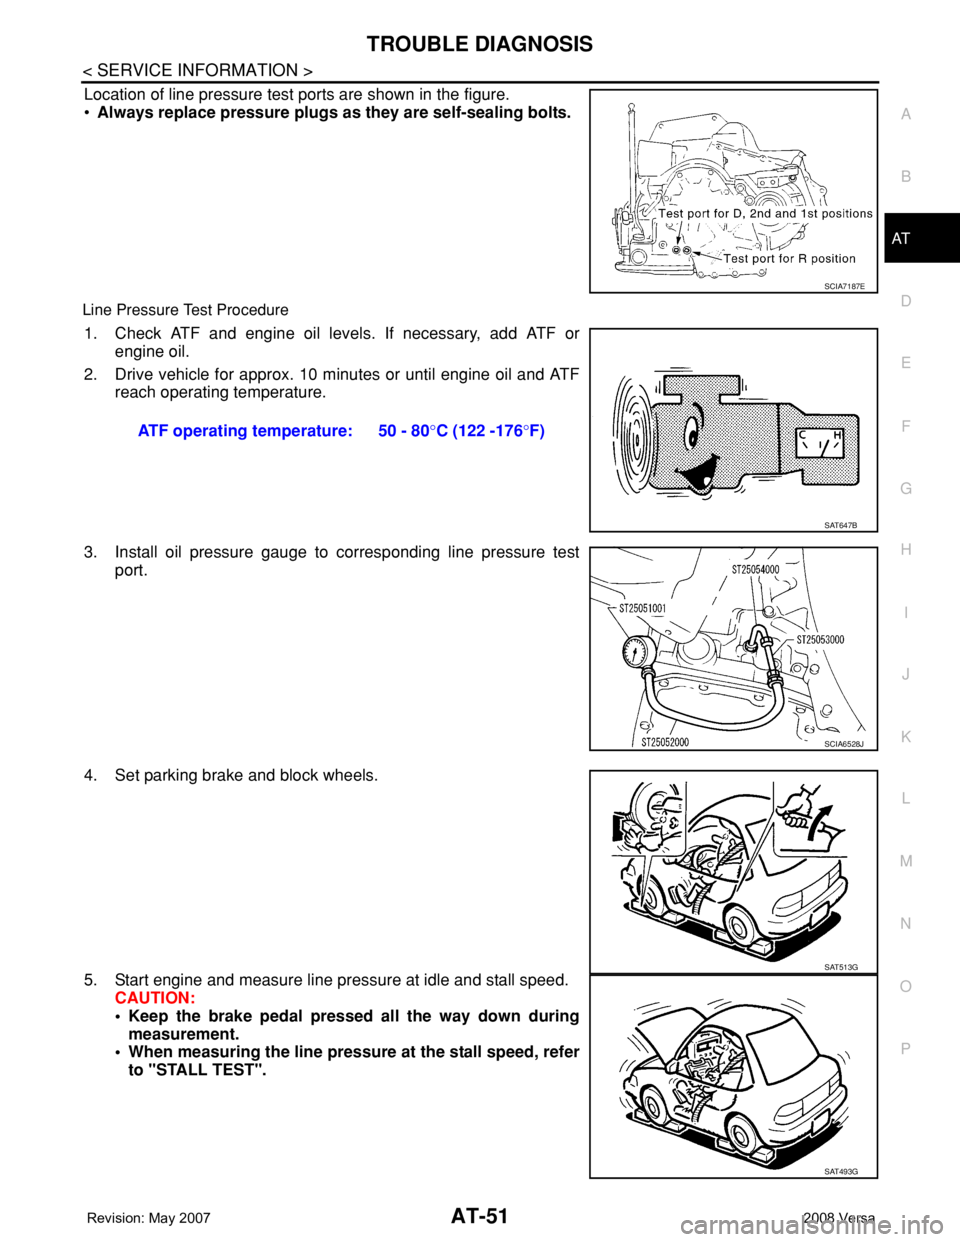 NISSAN LATIO 2008  Service Repair Manual TROUBLE DIAGNOSIS
AT-51
< SERVICE INFORMATION >
D
E
F
G
H
I
J
K
L
MA
B
AT
N
O
P
Location of line pressure test ports are shown in the figure.
•Always replace pressure plugs as they are self-sealing 